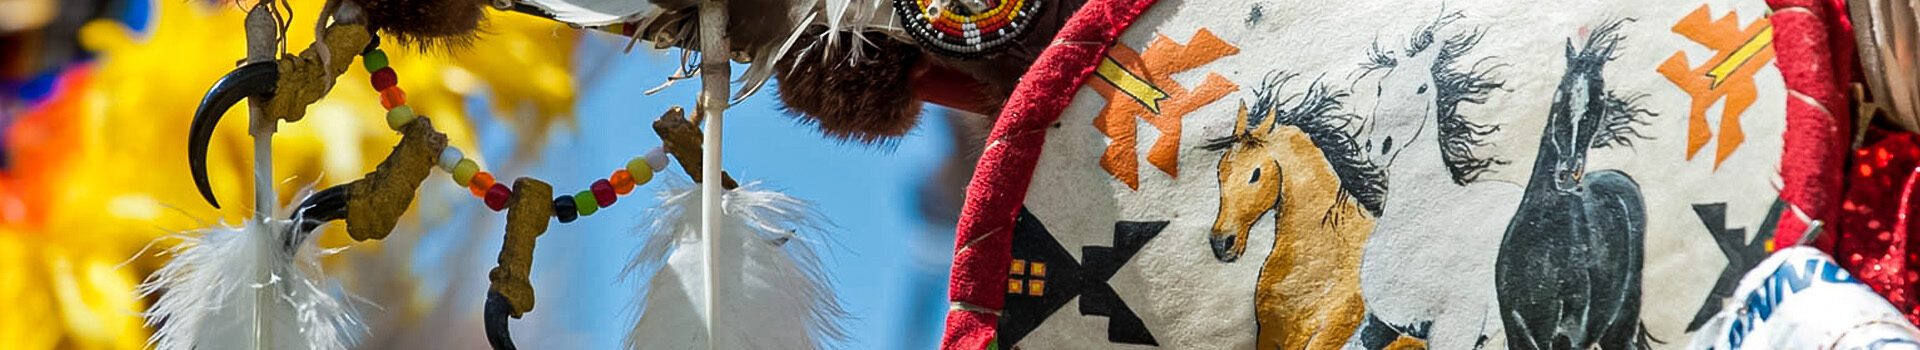 Close up of traditional clothing at the Pow Wow